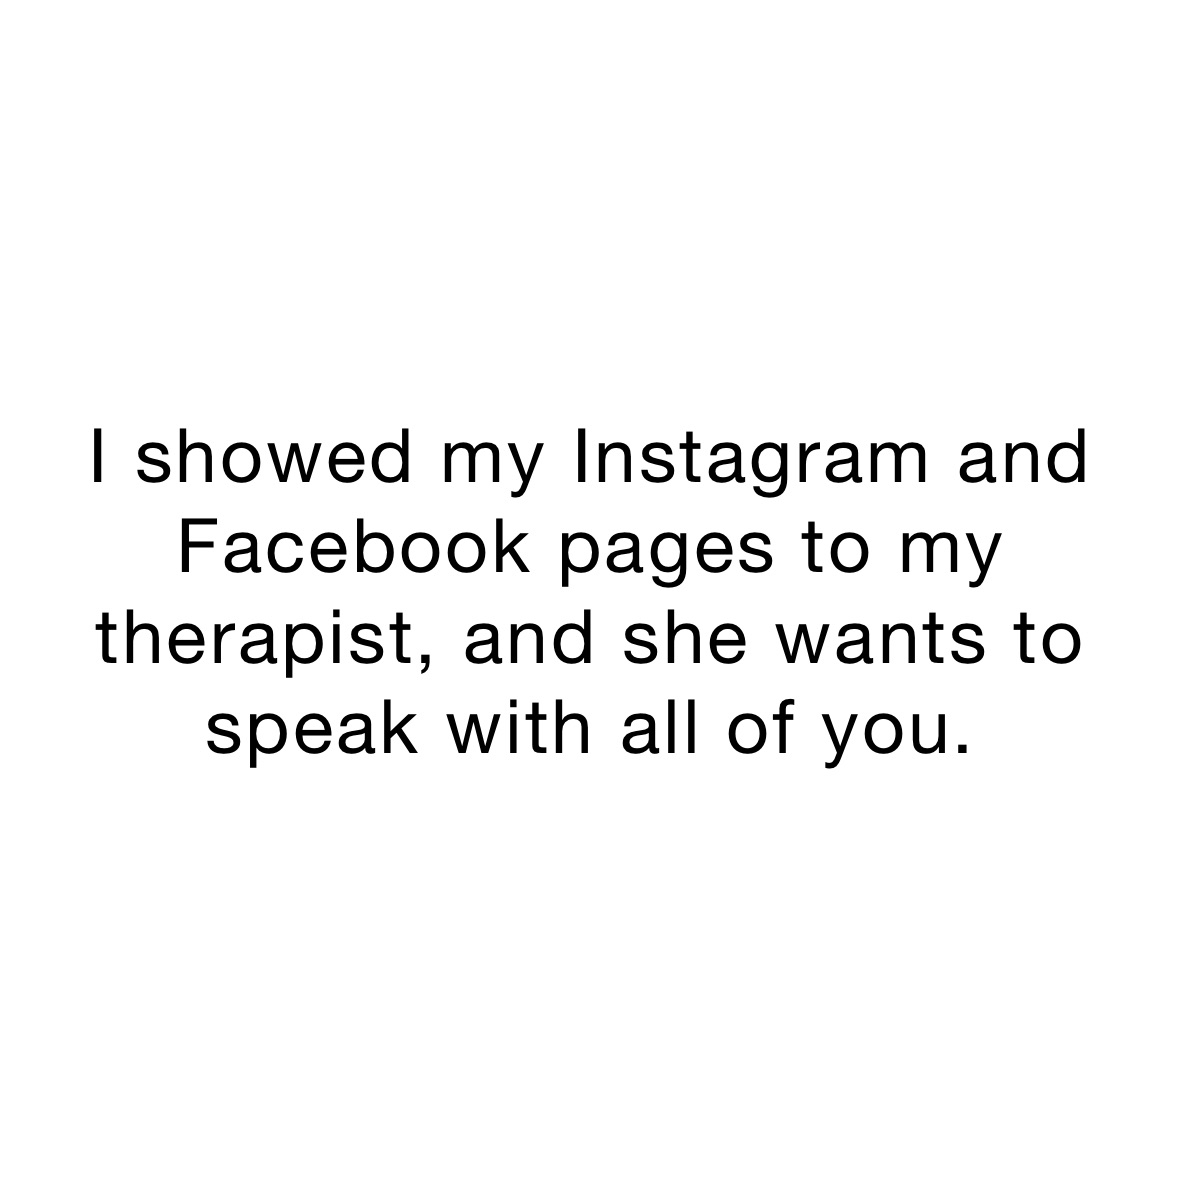 I showed my Instagram and Facebook pages to my therapist, and she wants to speak with all of you.